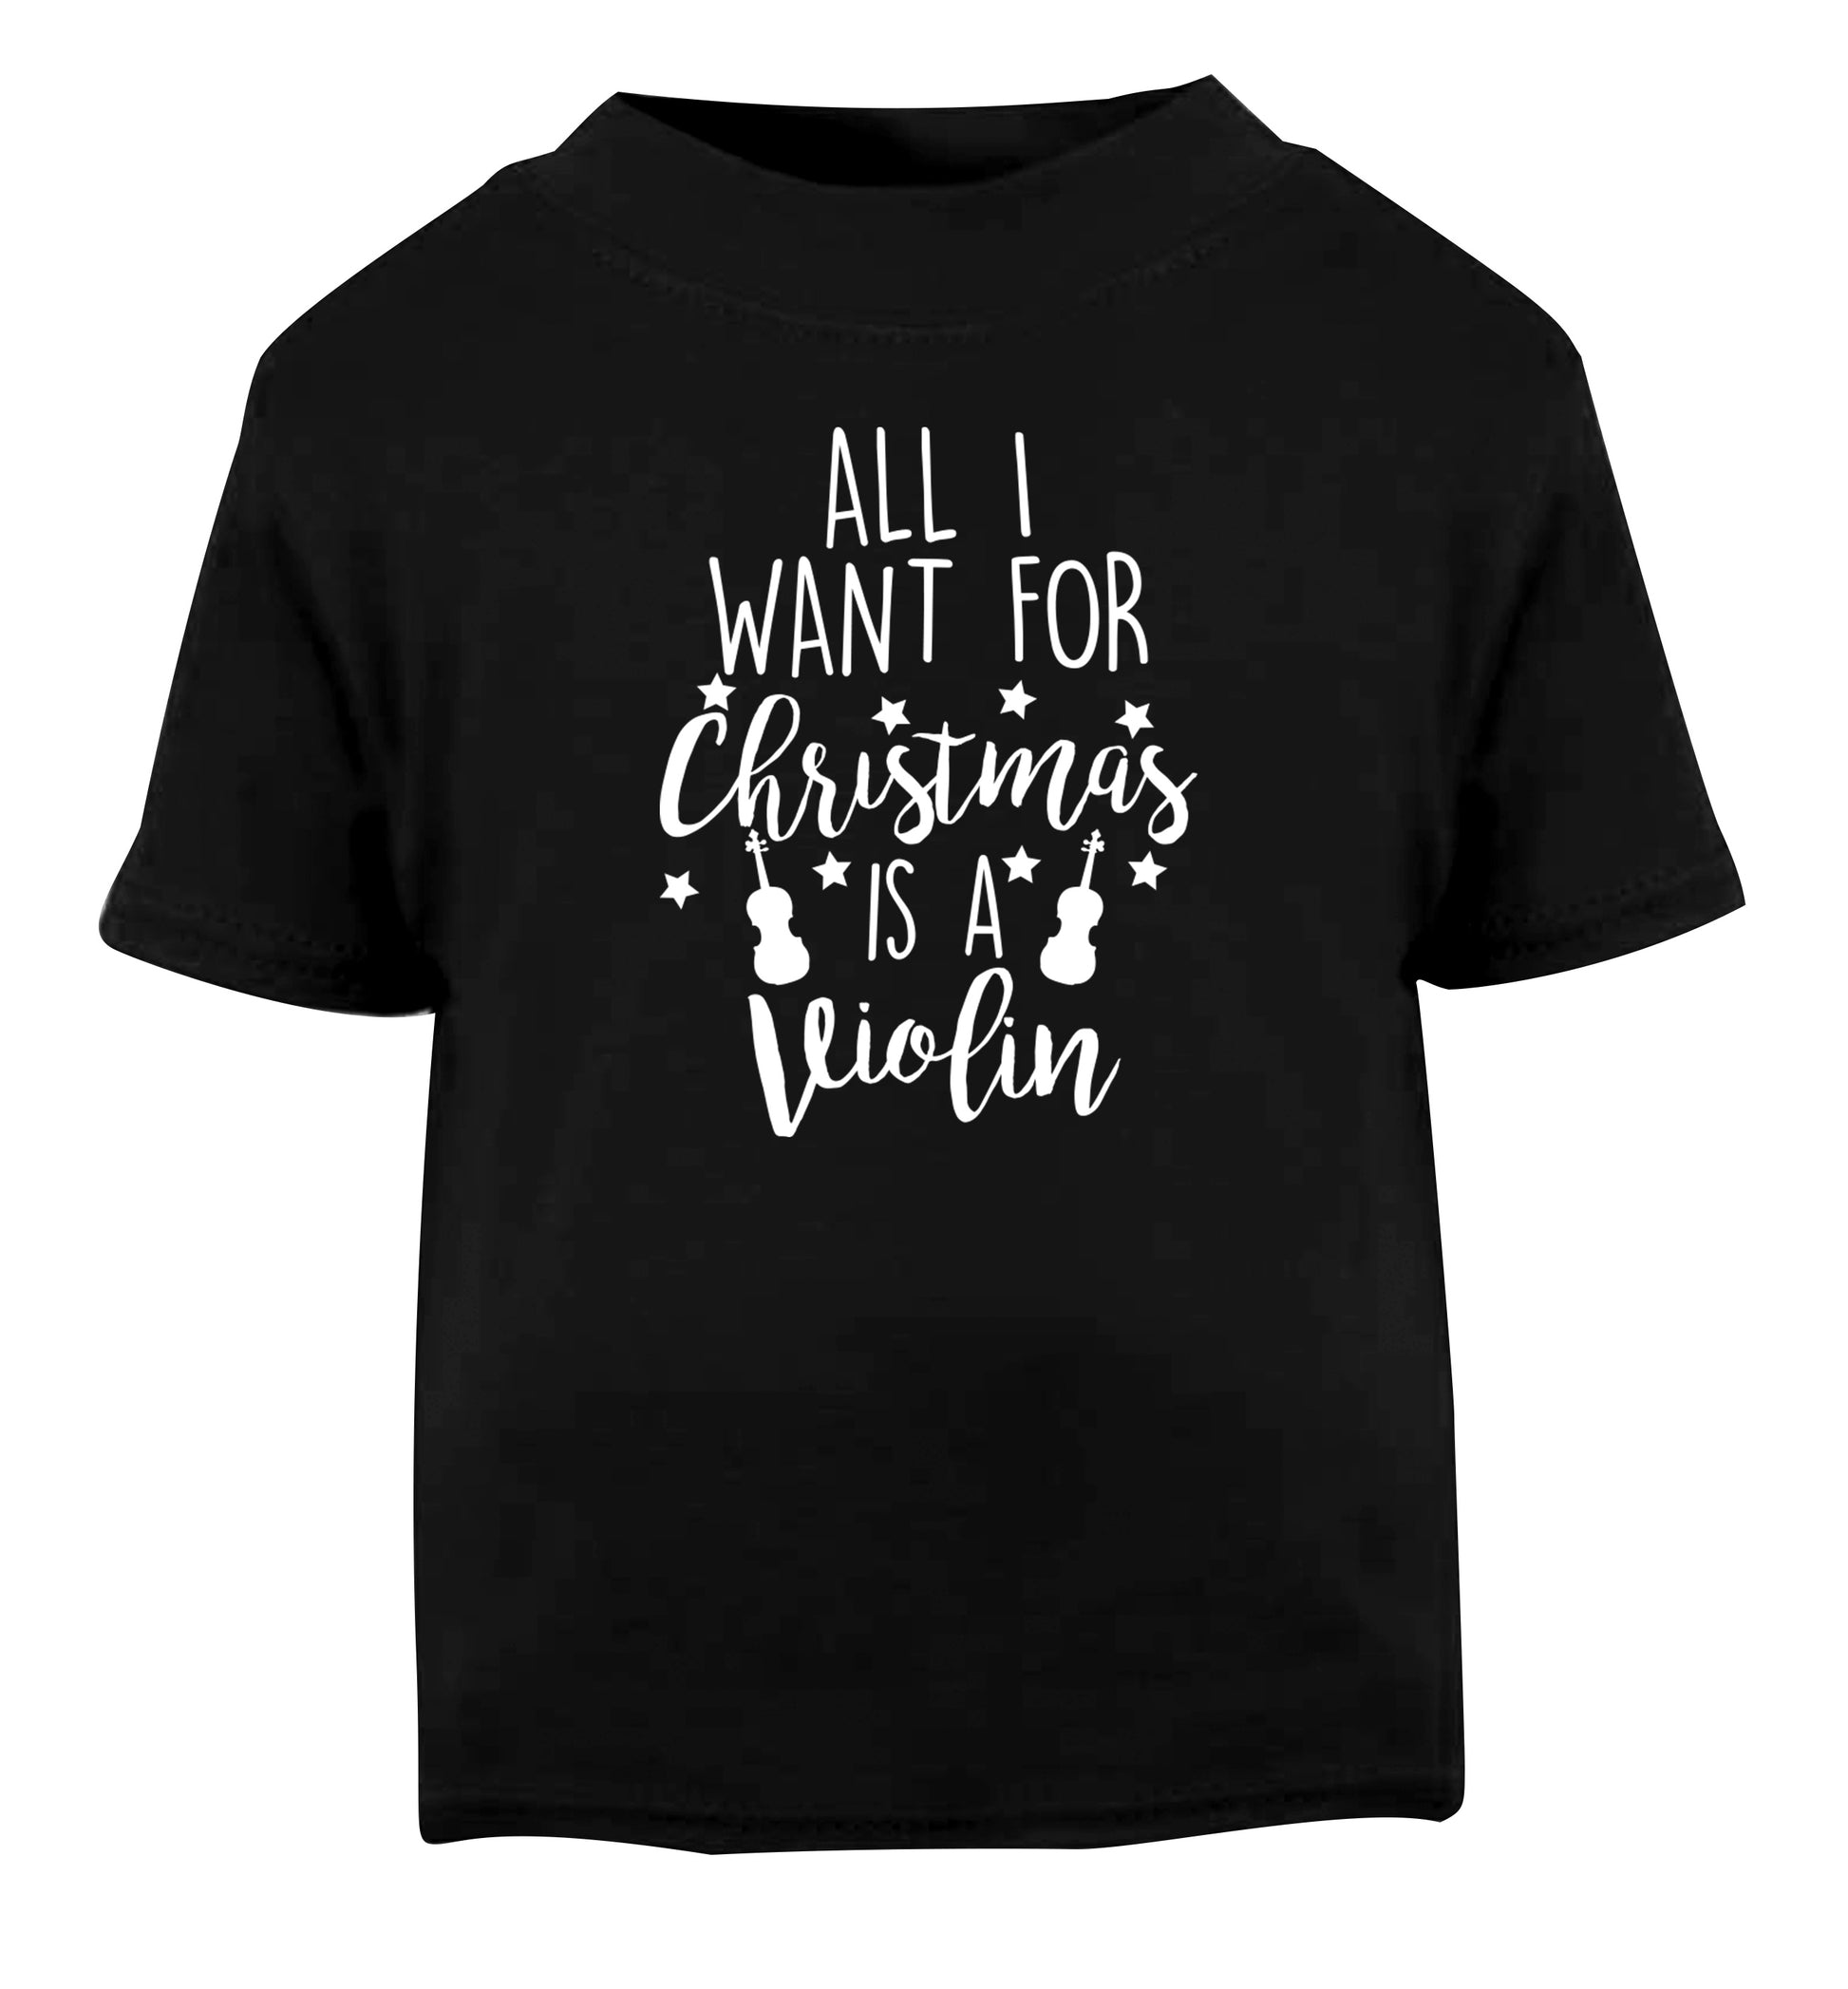 All I Want For Christmas is a Violin Black Baby Toddler Tshirt 2 years